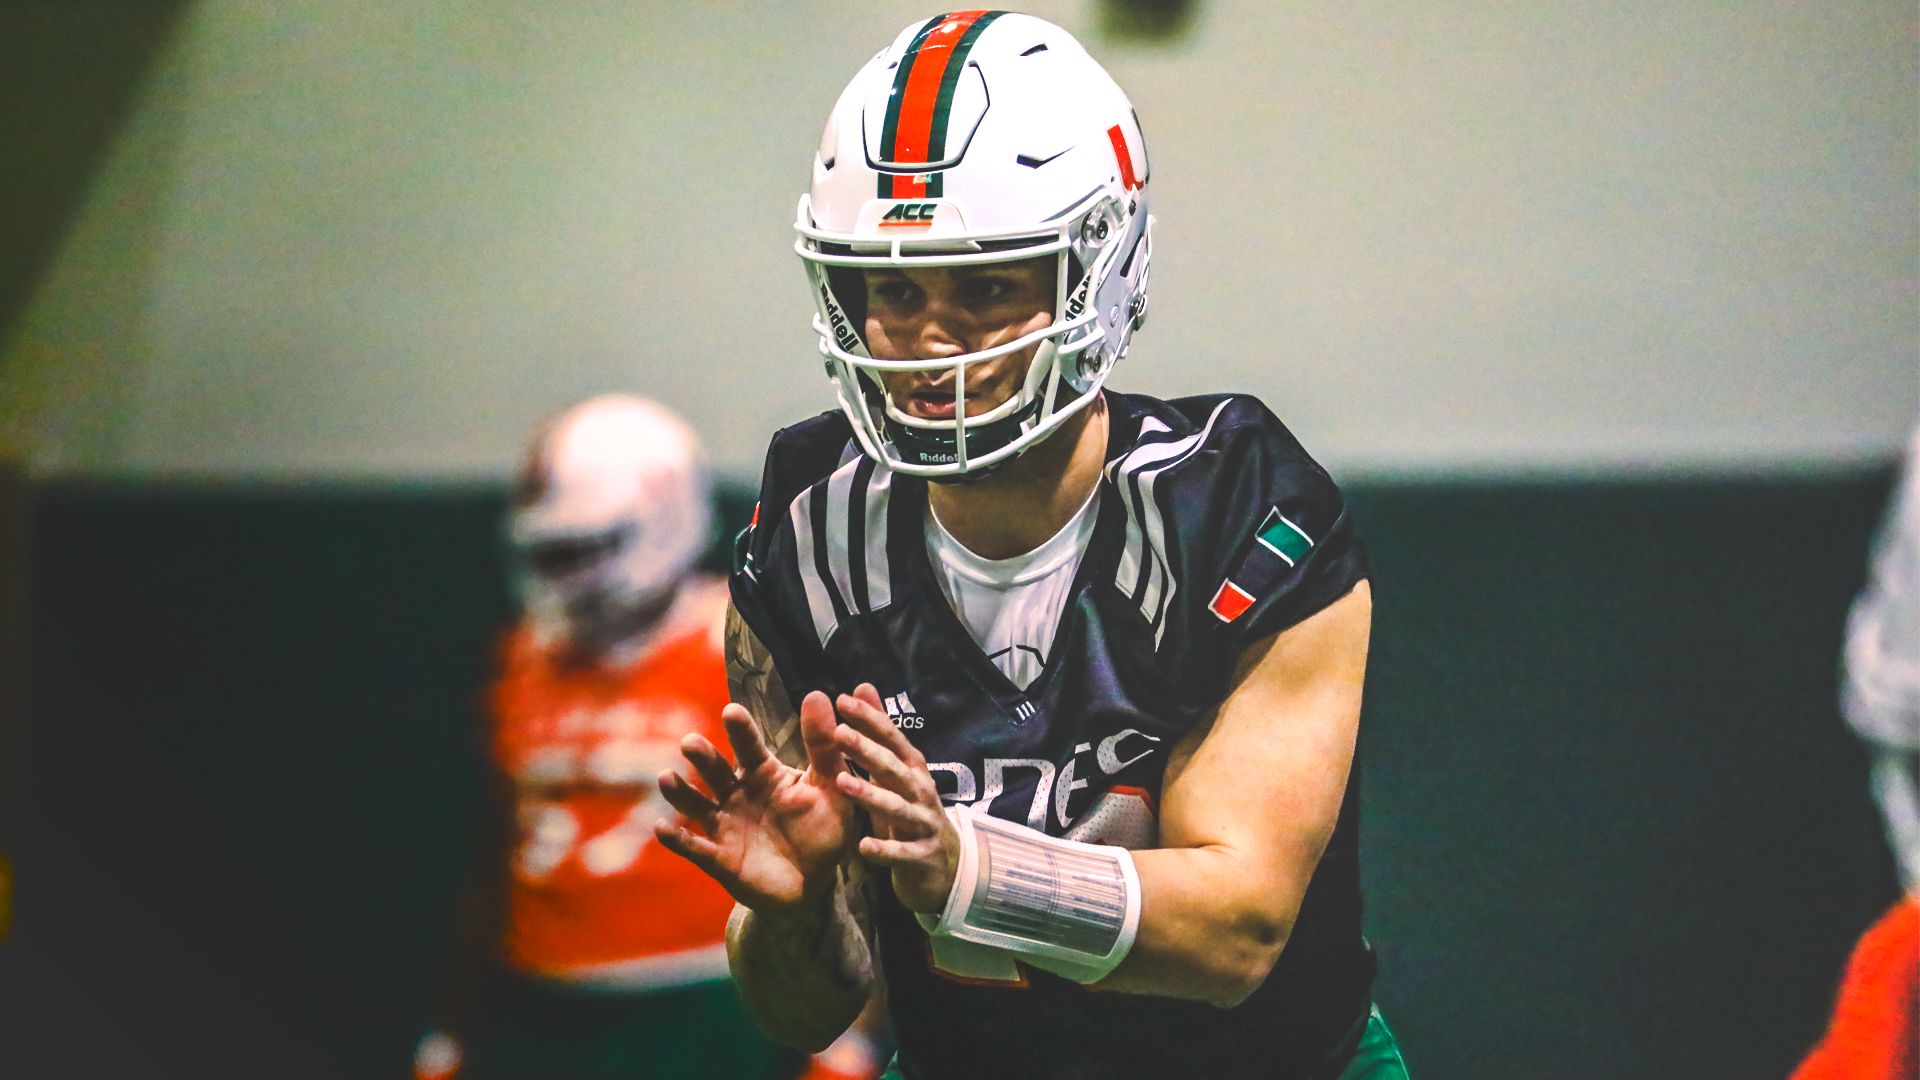 NCAA Approves Waiver for Tate Martell